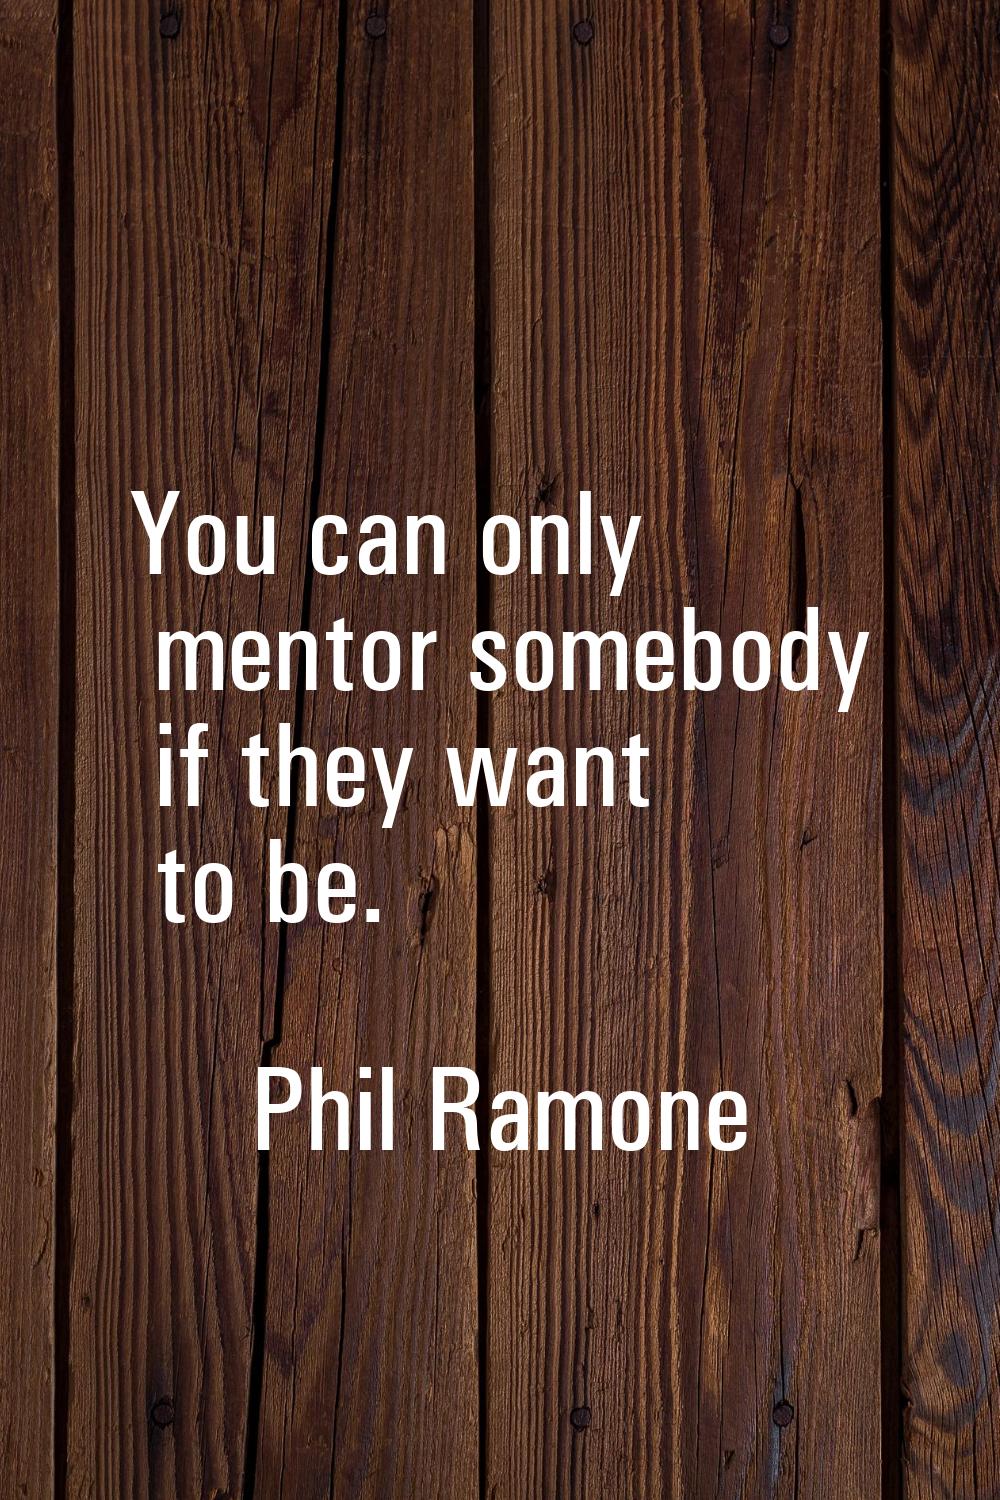 You can only mentor somebody if they want to be.